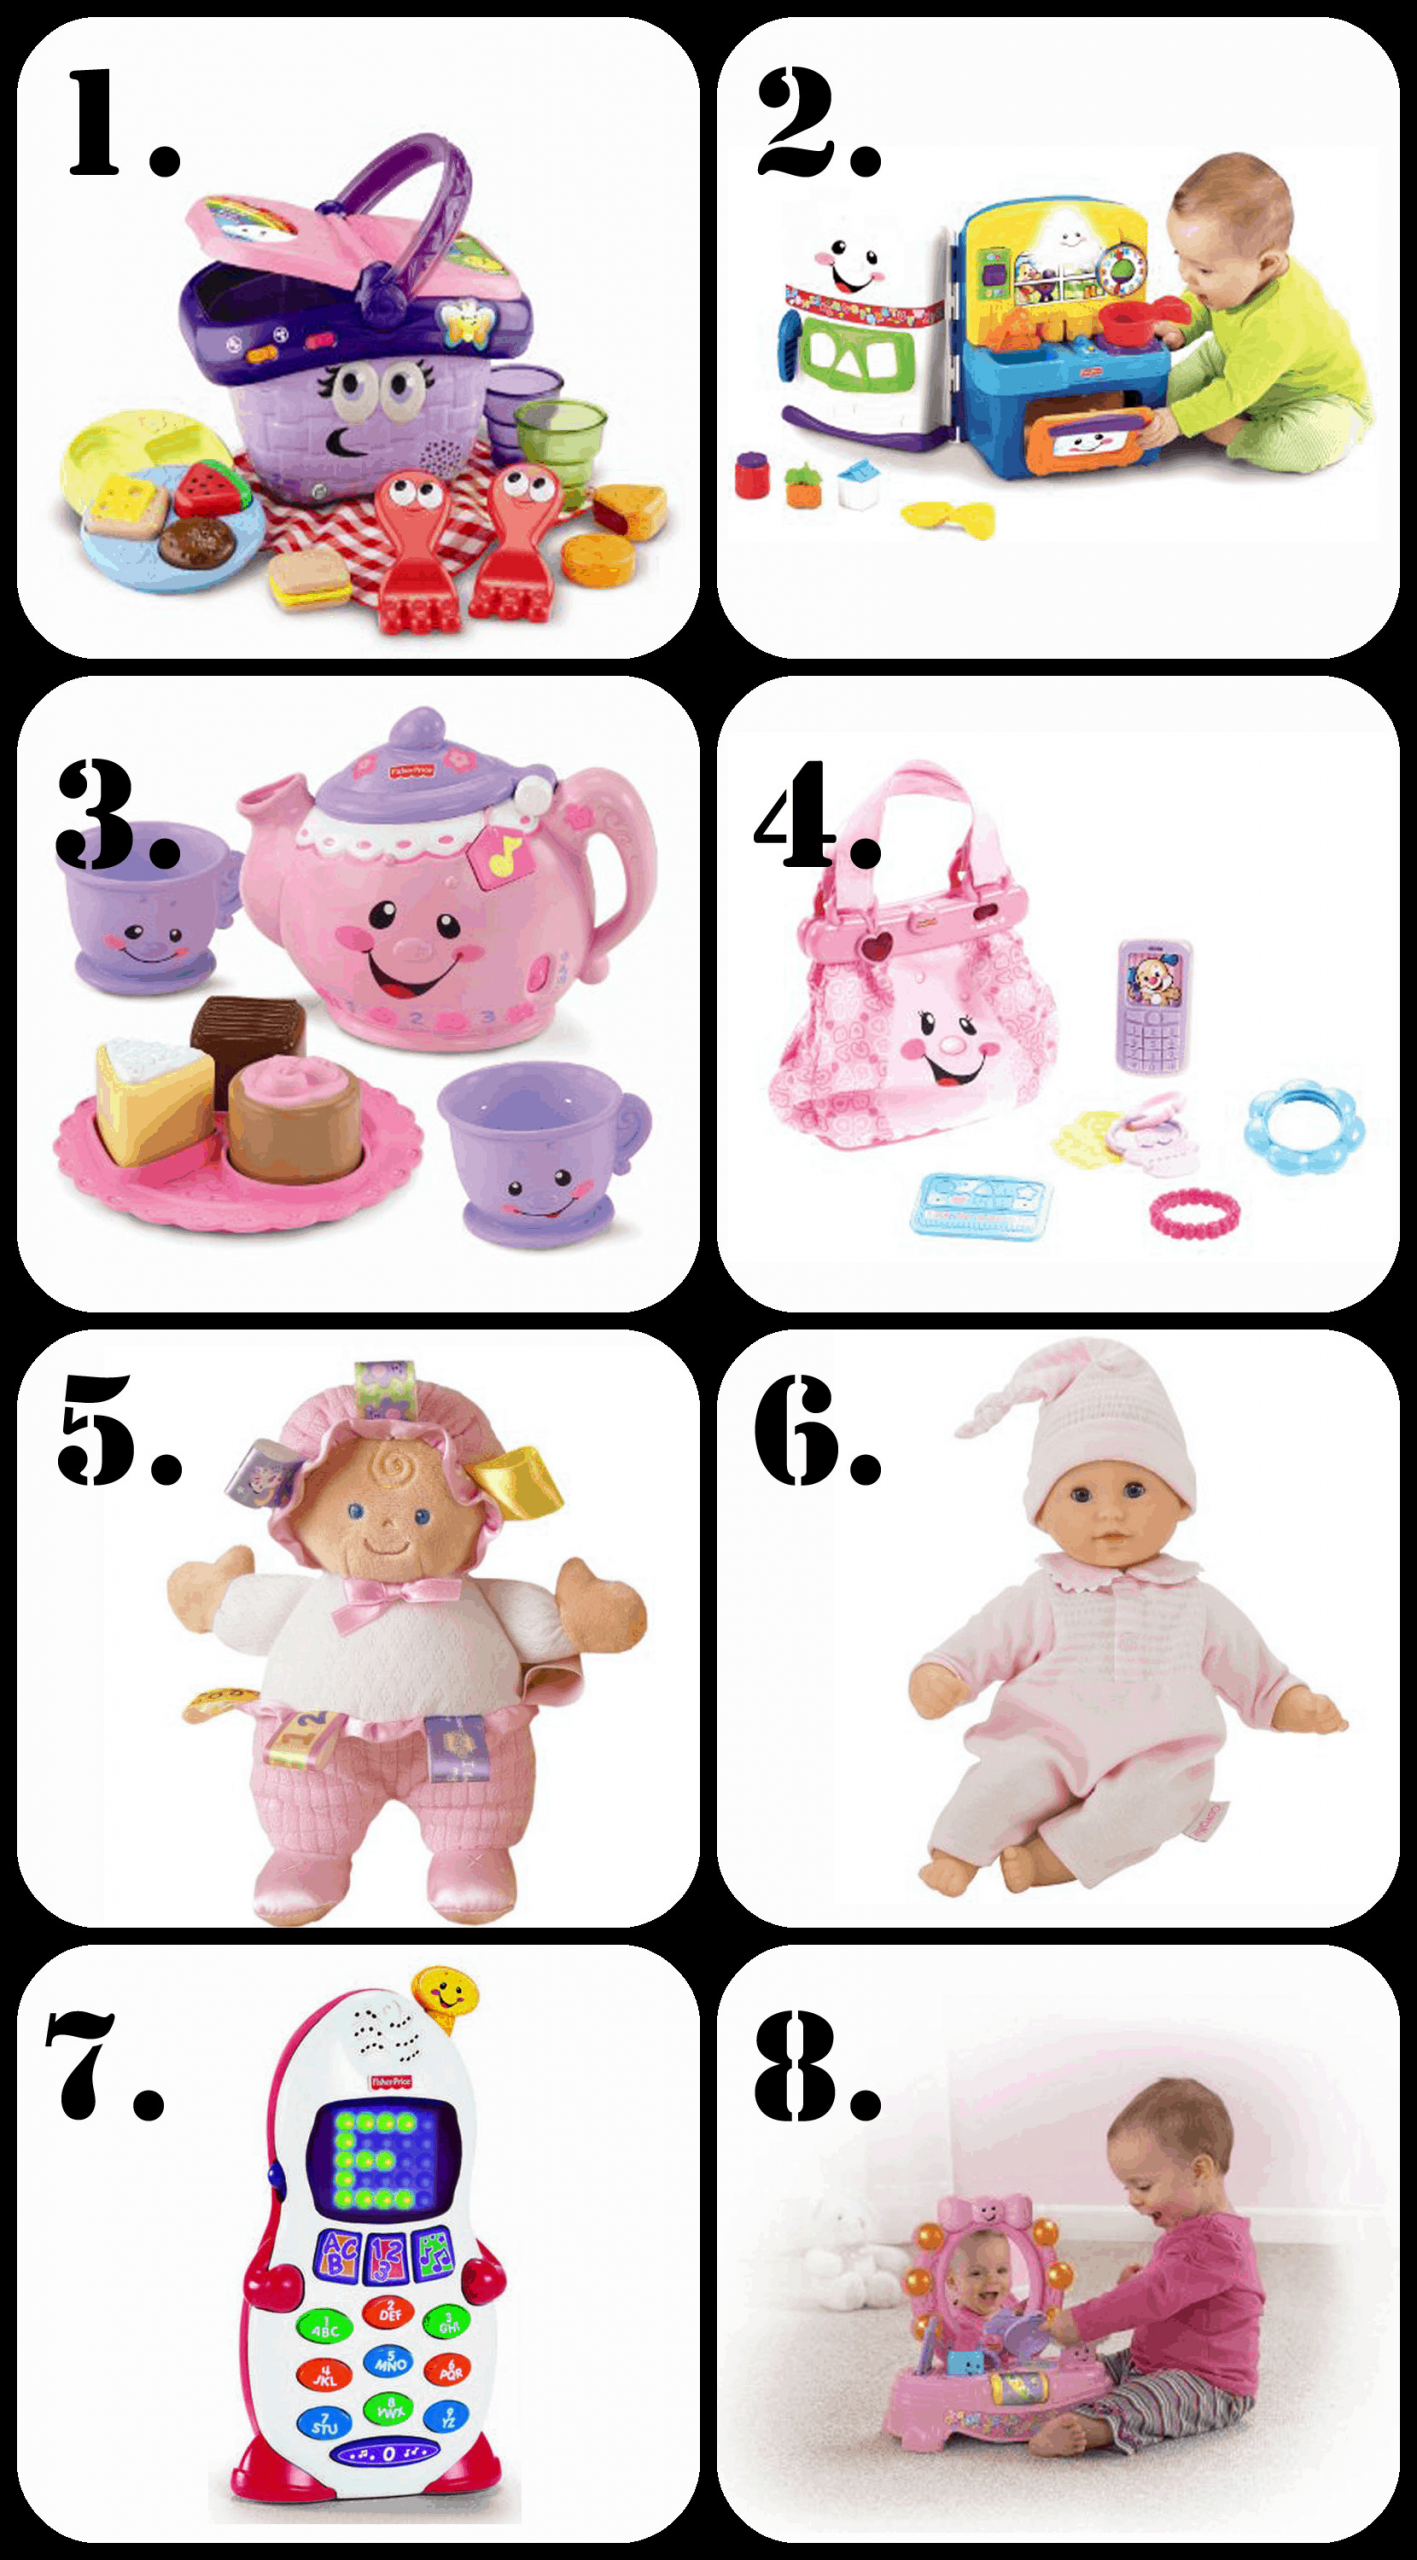 Gift Ideas For 1 Year Baby Girl
 The Ultimate List of Gift Ideas for a 1 Year Old Girl